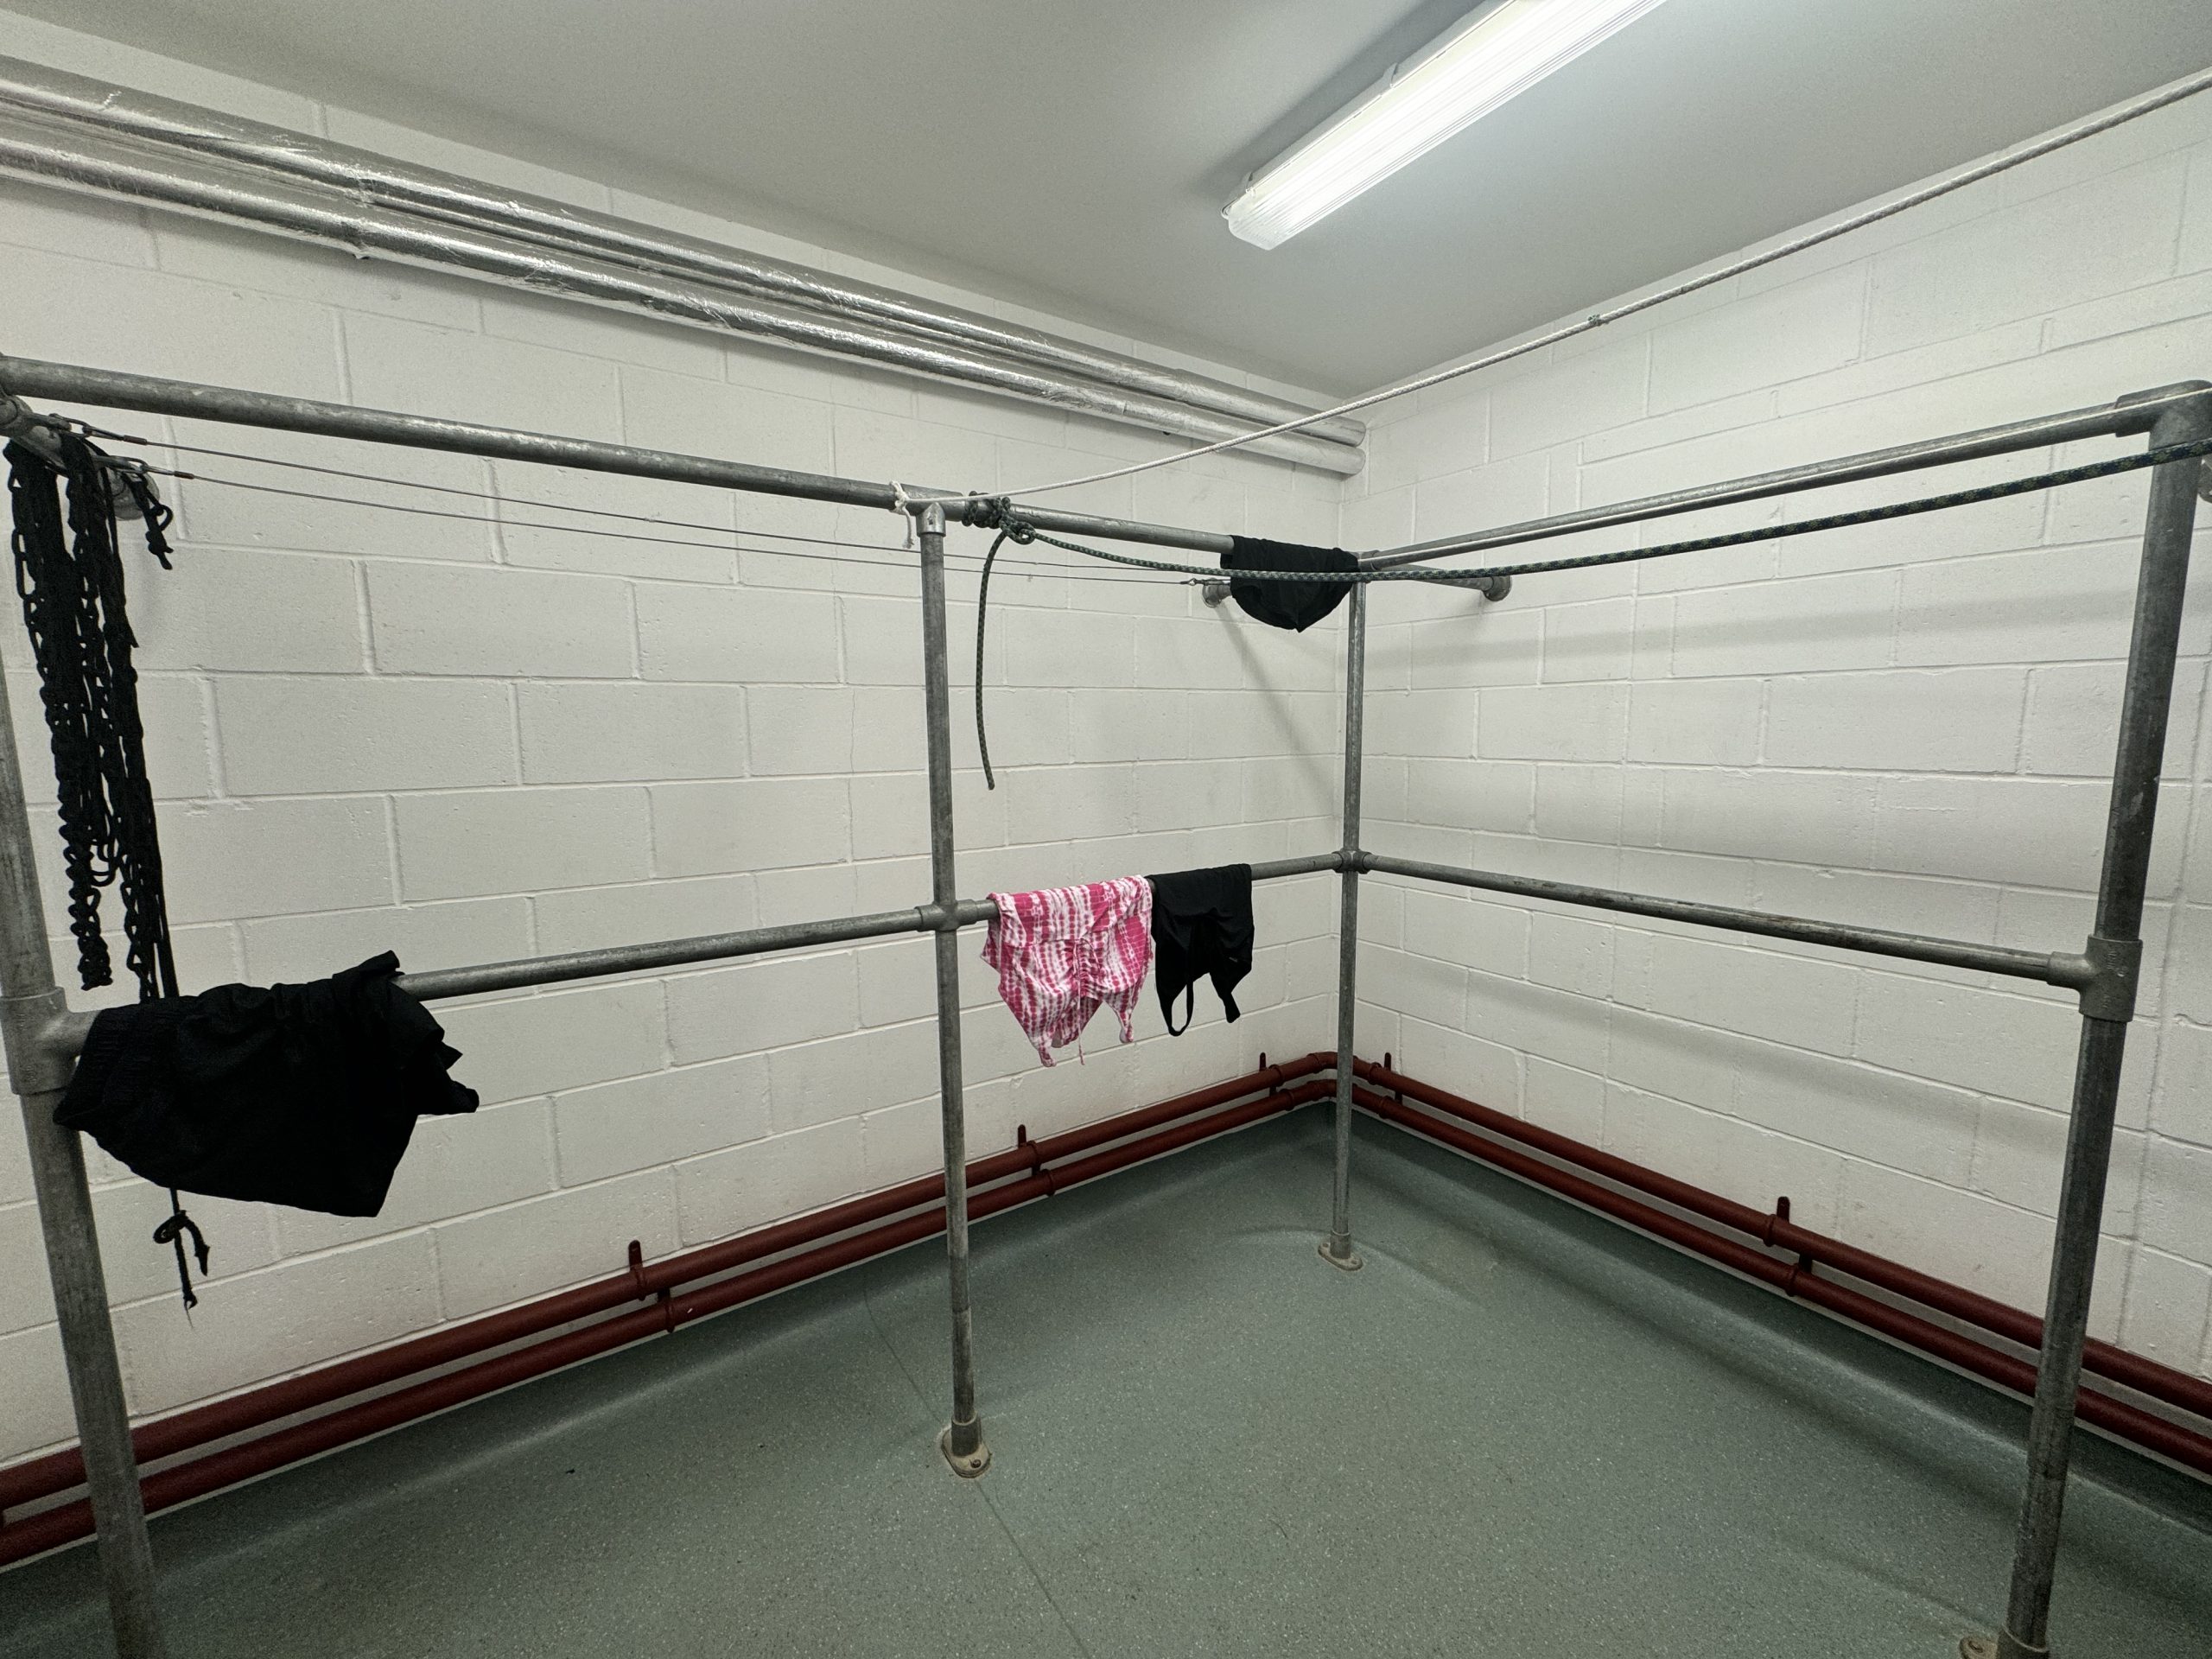 A room with metal bar frames with a few items of clothing dangled over them to dry